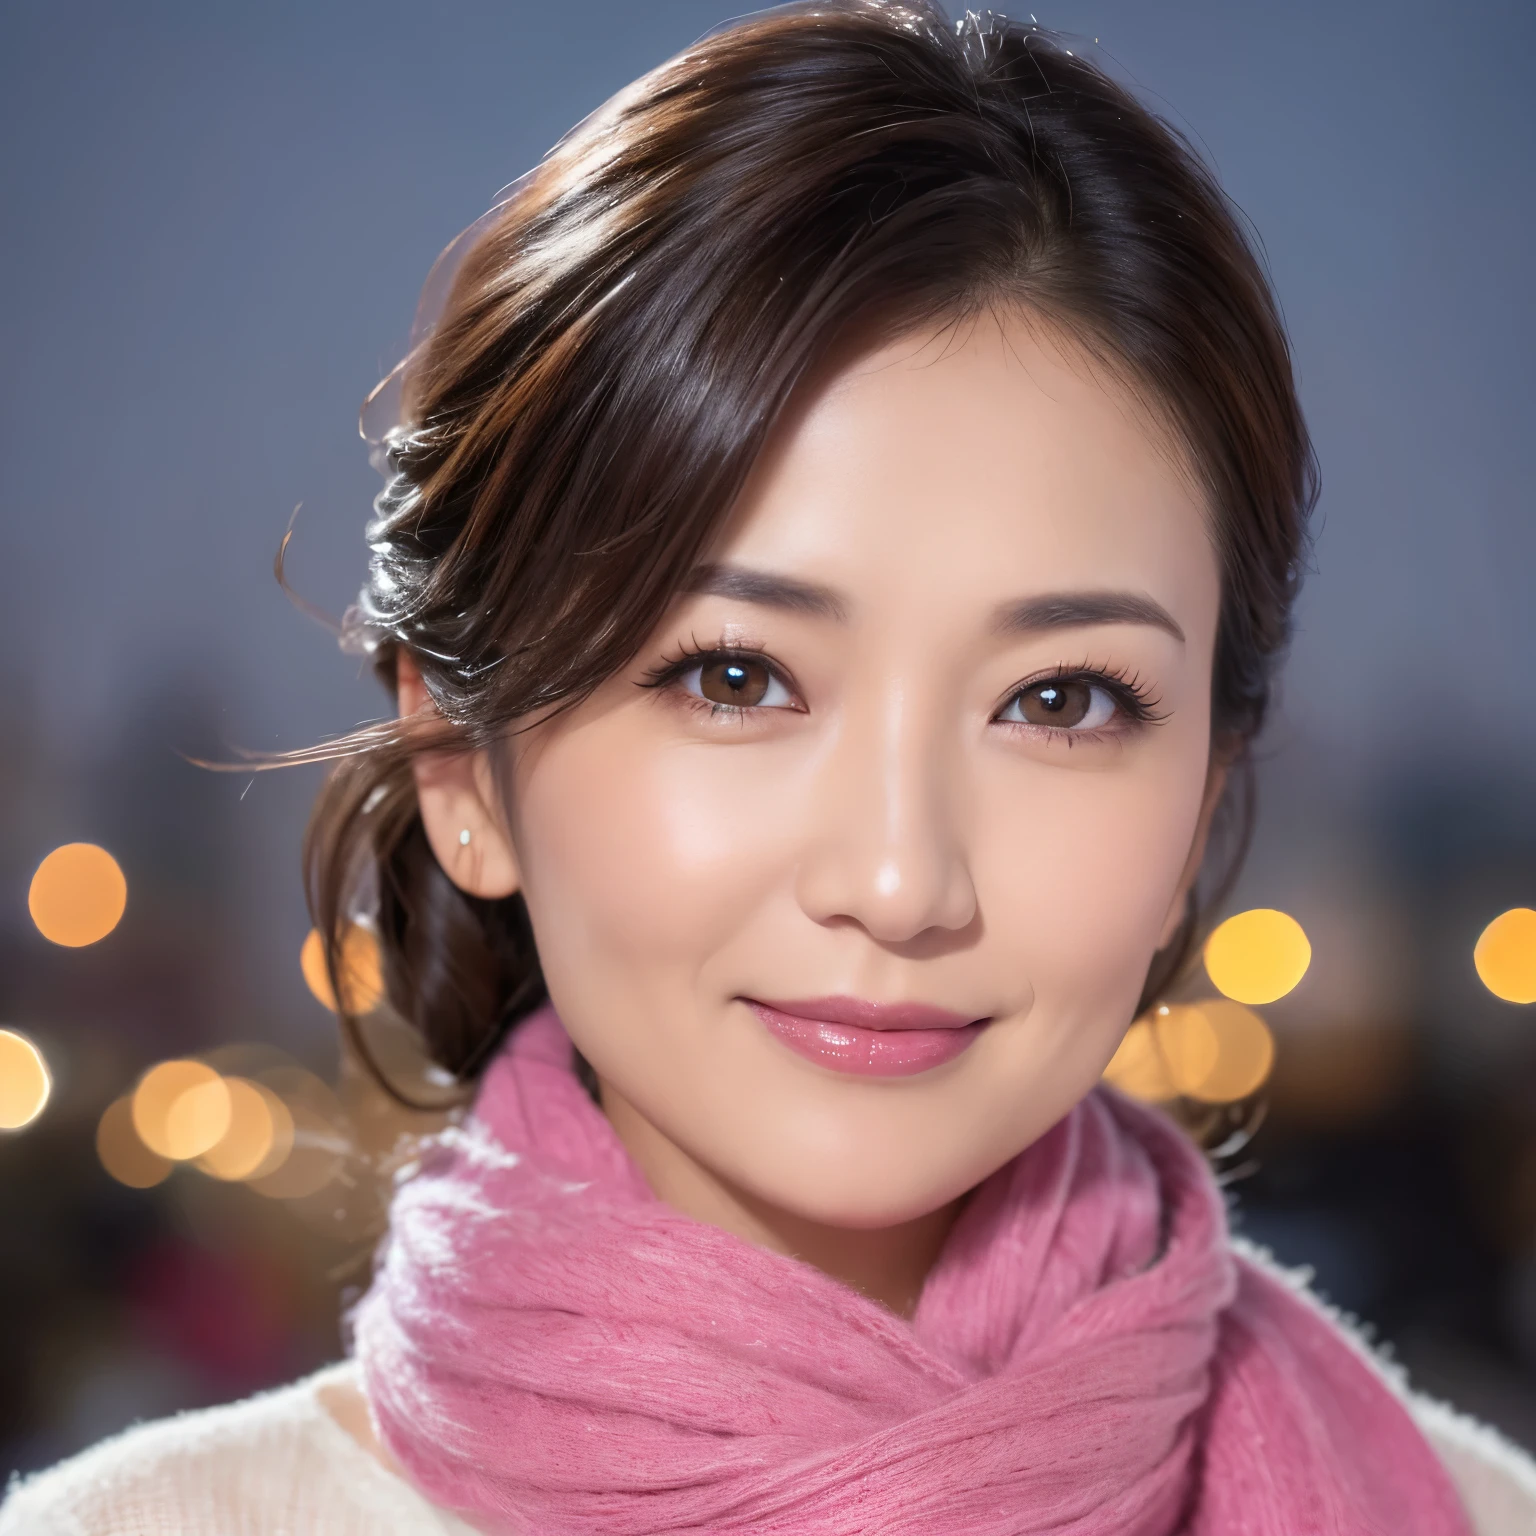 ((highest quality、table top、8K、best image quality、Award-winning work))、one beautiful mature woman、45 year old mature woman、smile looking at me、(close up of face:1.6)、(Perfect and most natural pink long scarf:1.2)、(Elegant gray thick coat:1.1)、epic movie lighting、(romantic love feelings:1.1)、(The most romantic and moody atmosphere:1.1)、winter city、Snowy landscape in the city、(The snow in the air sparkles finely:1.1)、(It&#39;s snowing heavily:1.1)、(Tyndall effect:1.1)、(Night view of the city with snow falling:1.2)、Shining beautiful skin、(accurate anatomy:1.1)、Ultra high definition beauty face、long eyelashes、natural makeup、ultra high definition hair、Ultra high definition eyes、(Shining beautiful skin with ultra-high resolution:1.1)、Super high resolution glossy lips、radiant beautiful skin